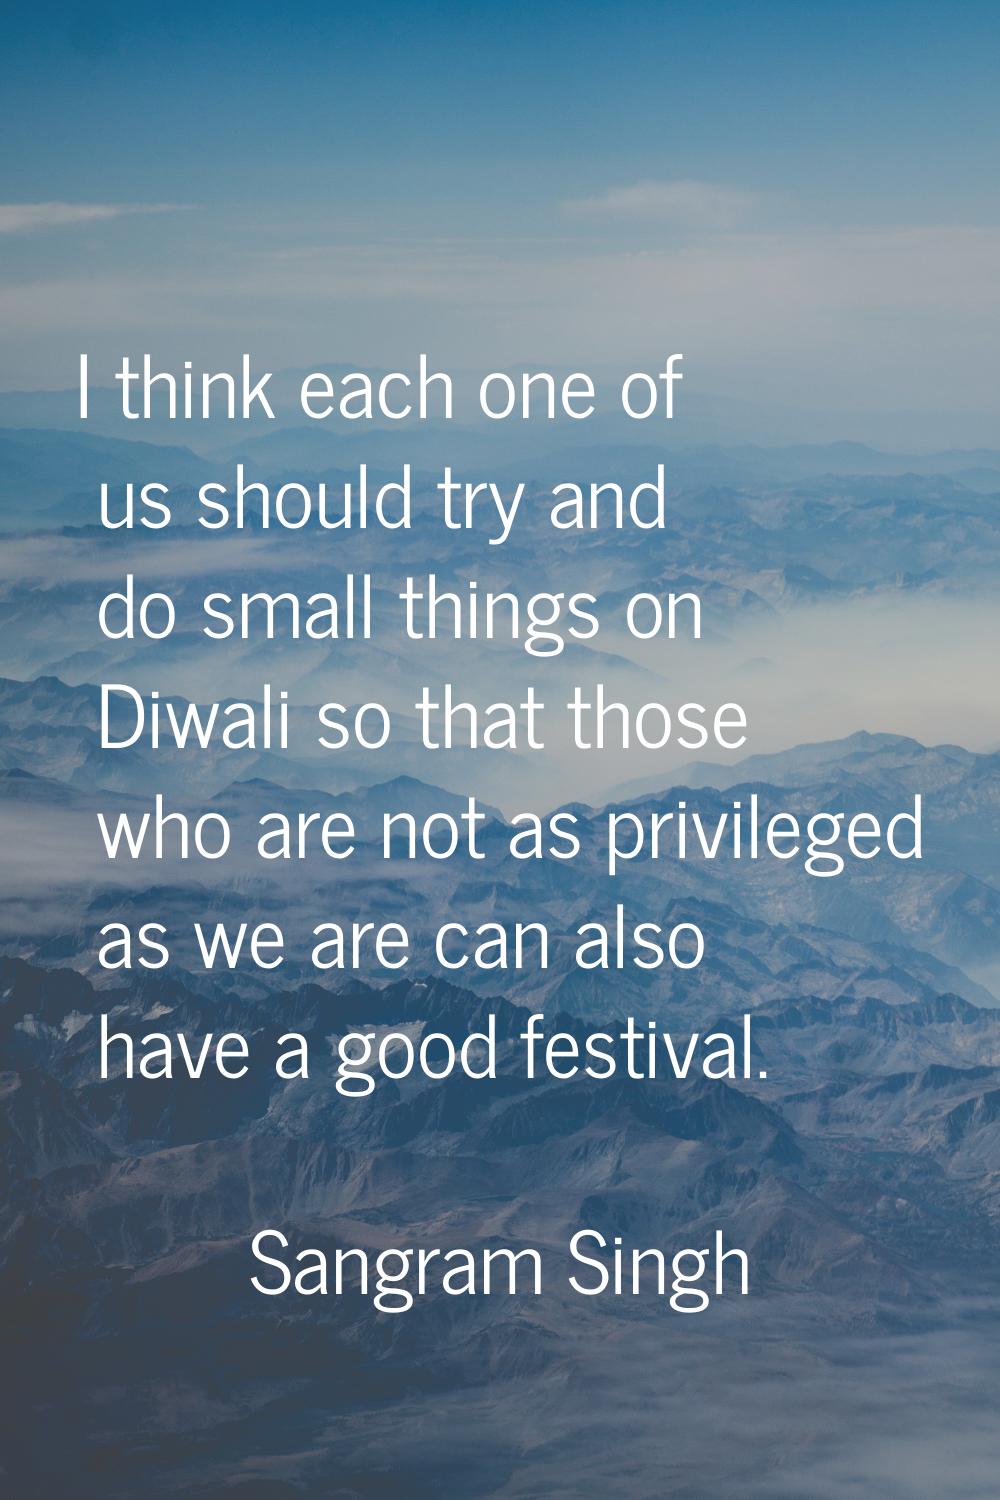 I think each one of us should try and do small things on Diwali so that those who are not as privil